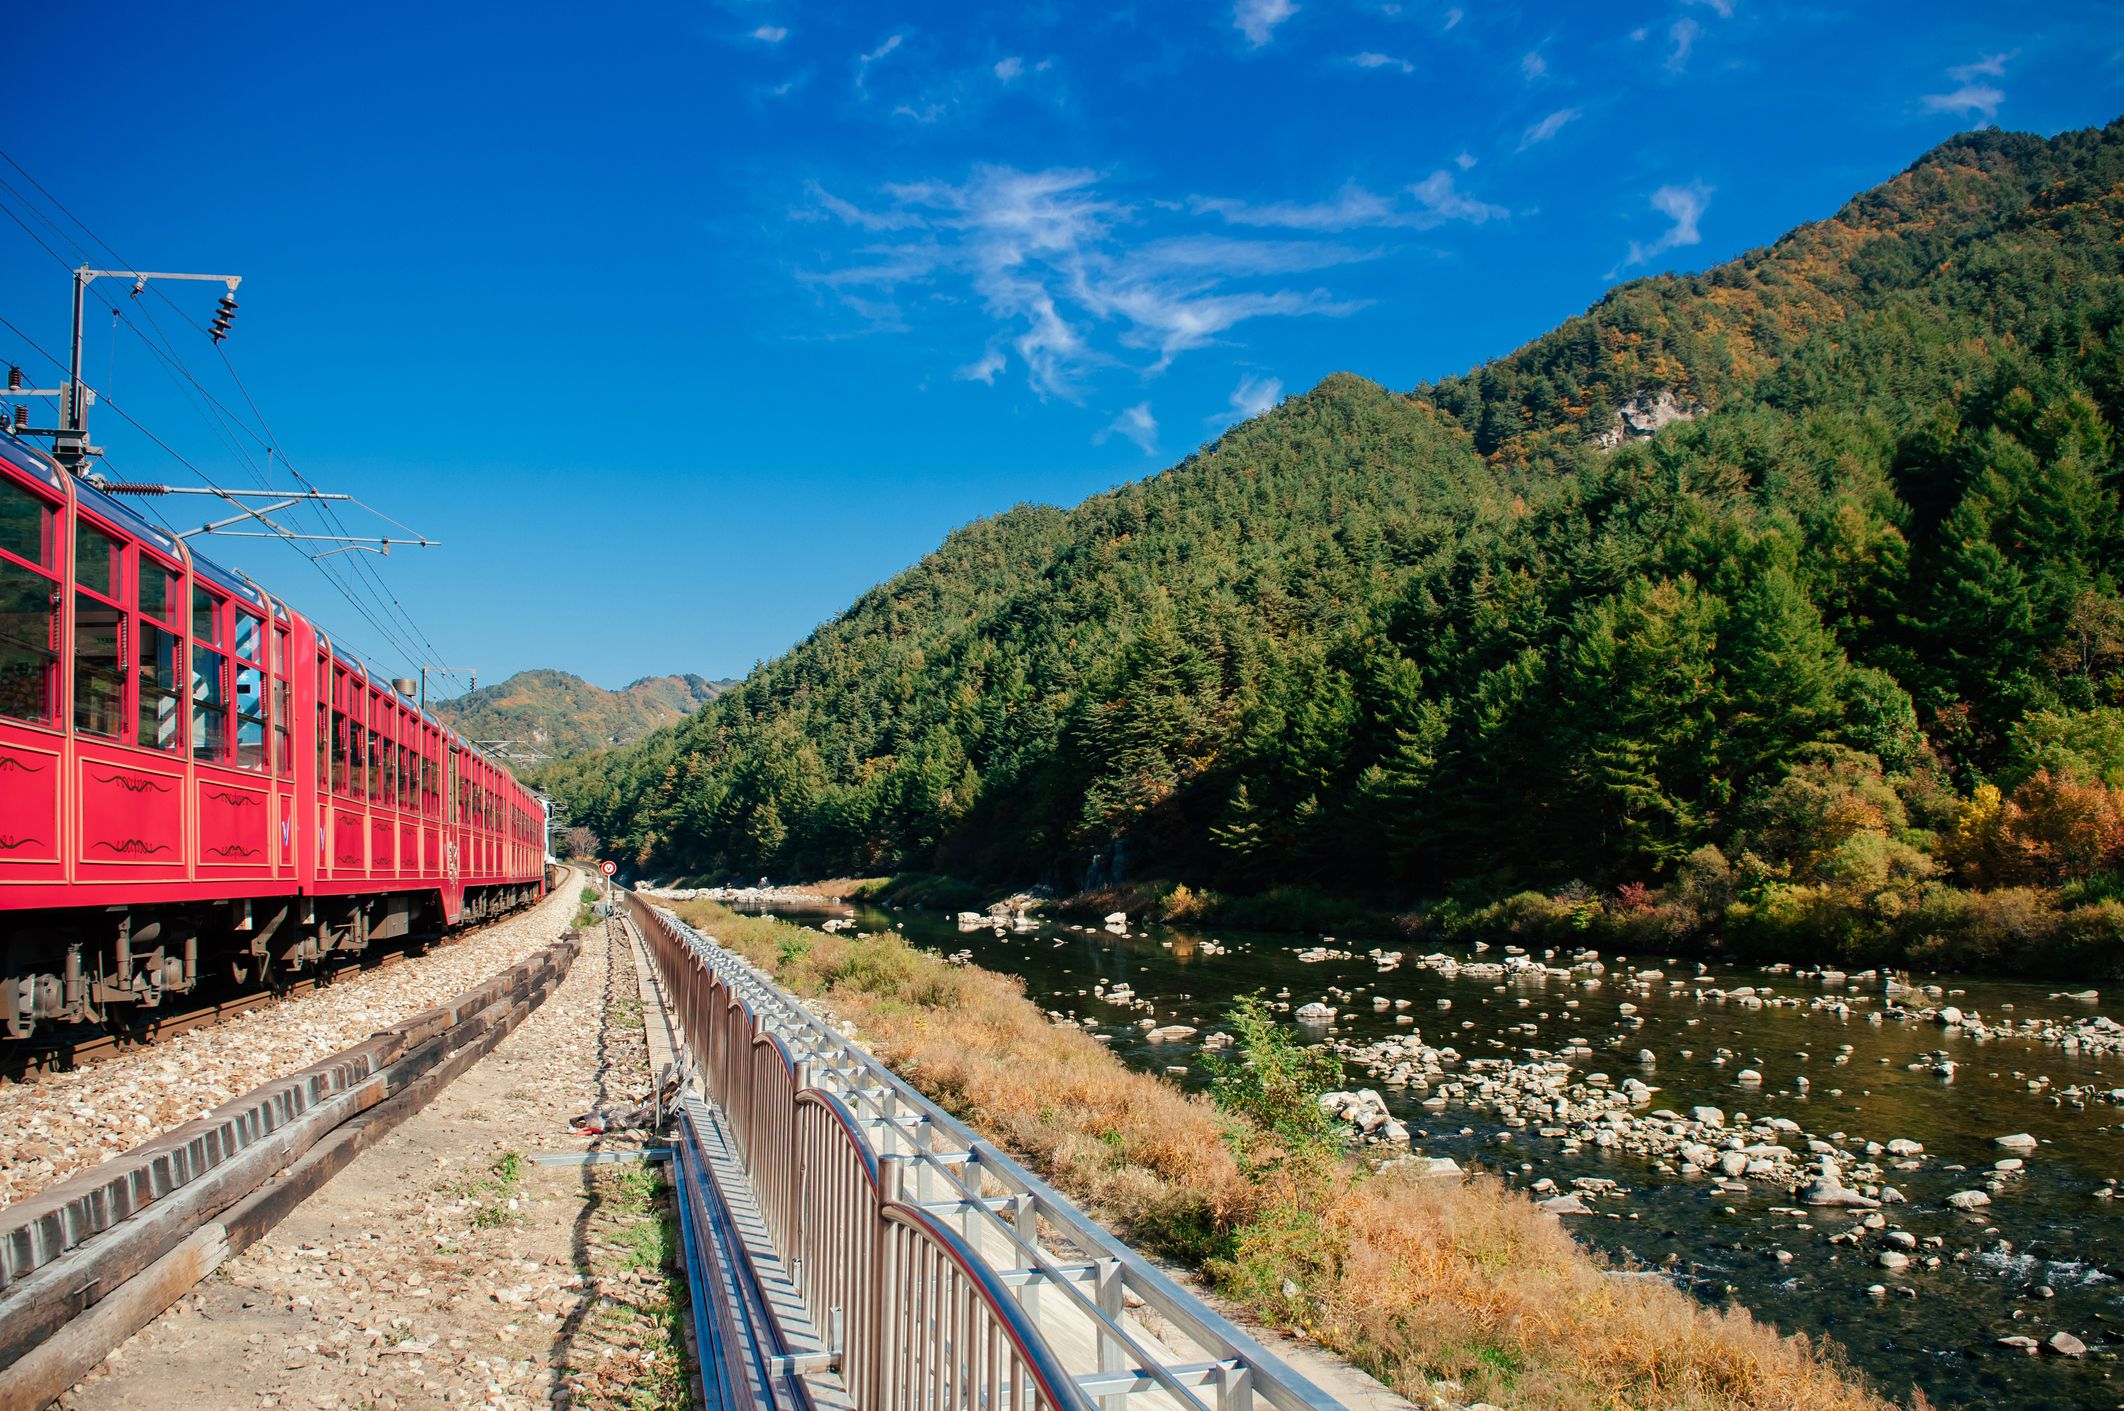 <p>South Korea’s Korail offers a variety of train routes for traversing different parts of the country while enjoying the scenery along the way. The V-Train follows a route through different valleys in a mountainous region of the country between Buncheon and Cheoram.</p><p>Three observatory cabins provide ample space to enjoy the passing scenery and there’s a mini cafe if you need refreshment. The V-Train runs at a slower pace than typical transporter trains so you can take your time with sightseeing.</p>